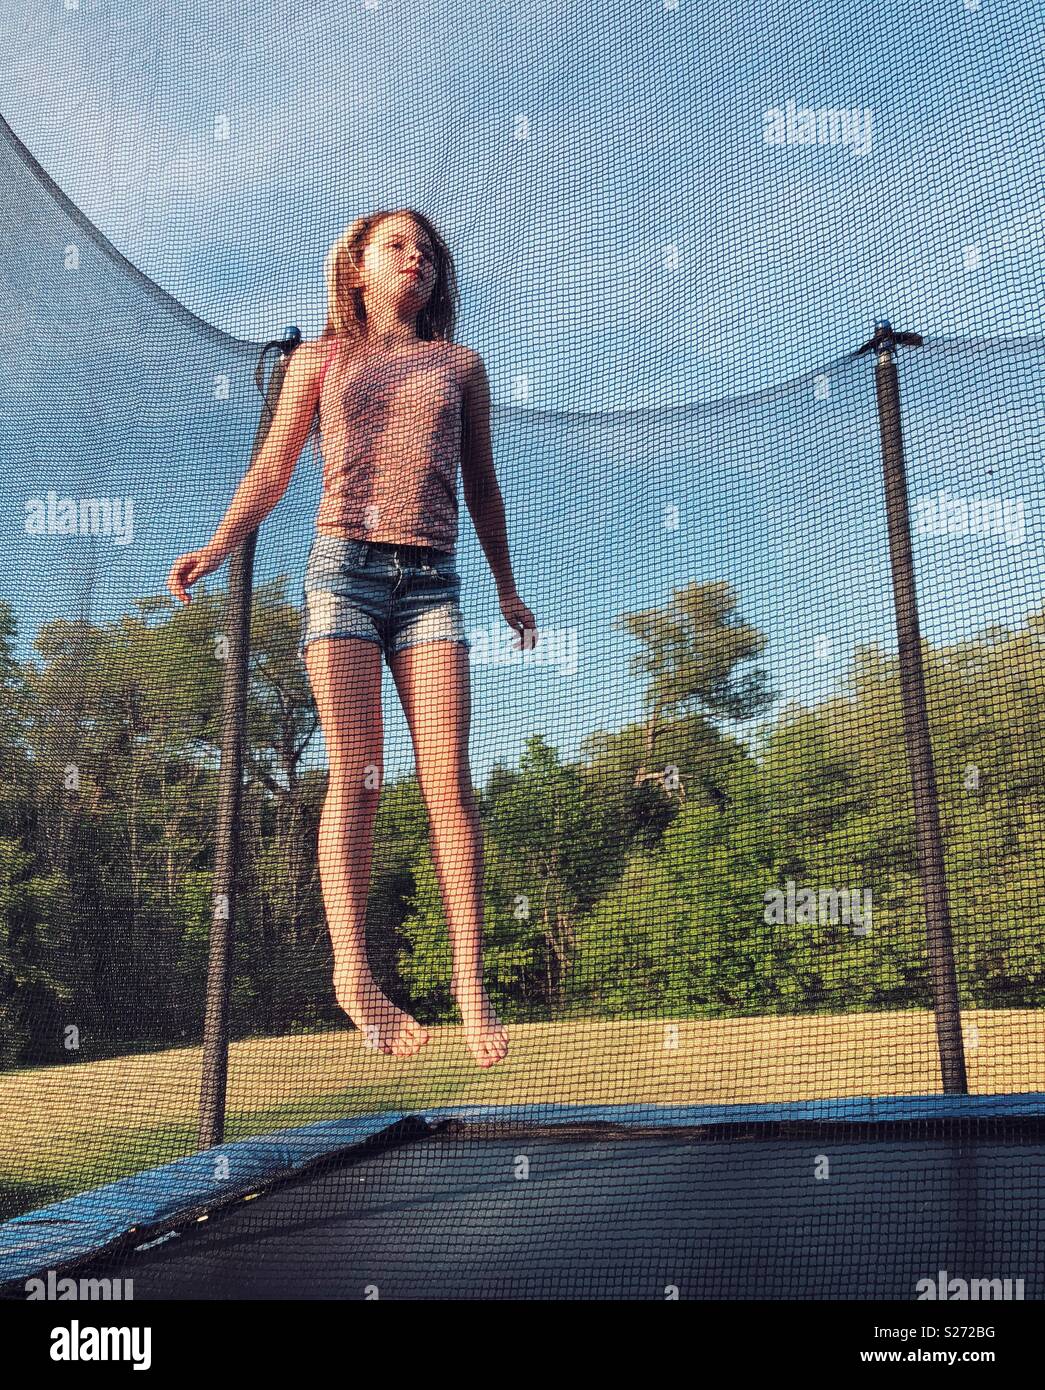 Tween girl jumping on a trampoline Stock Photo